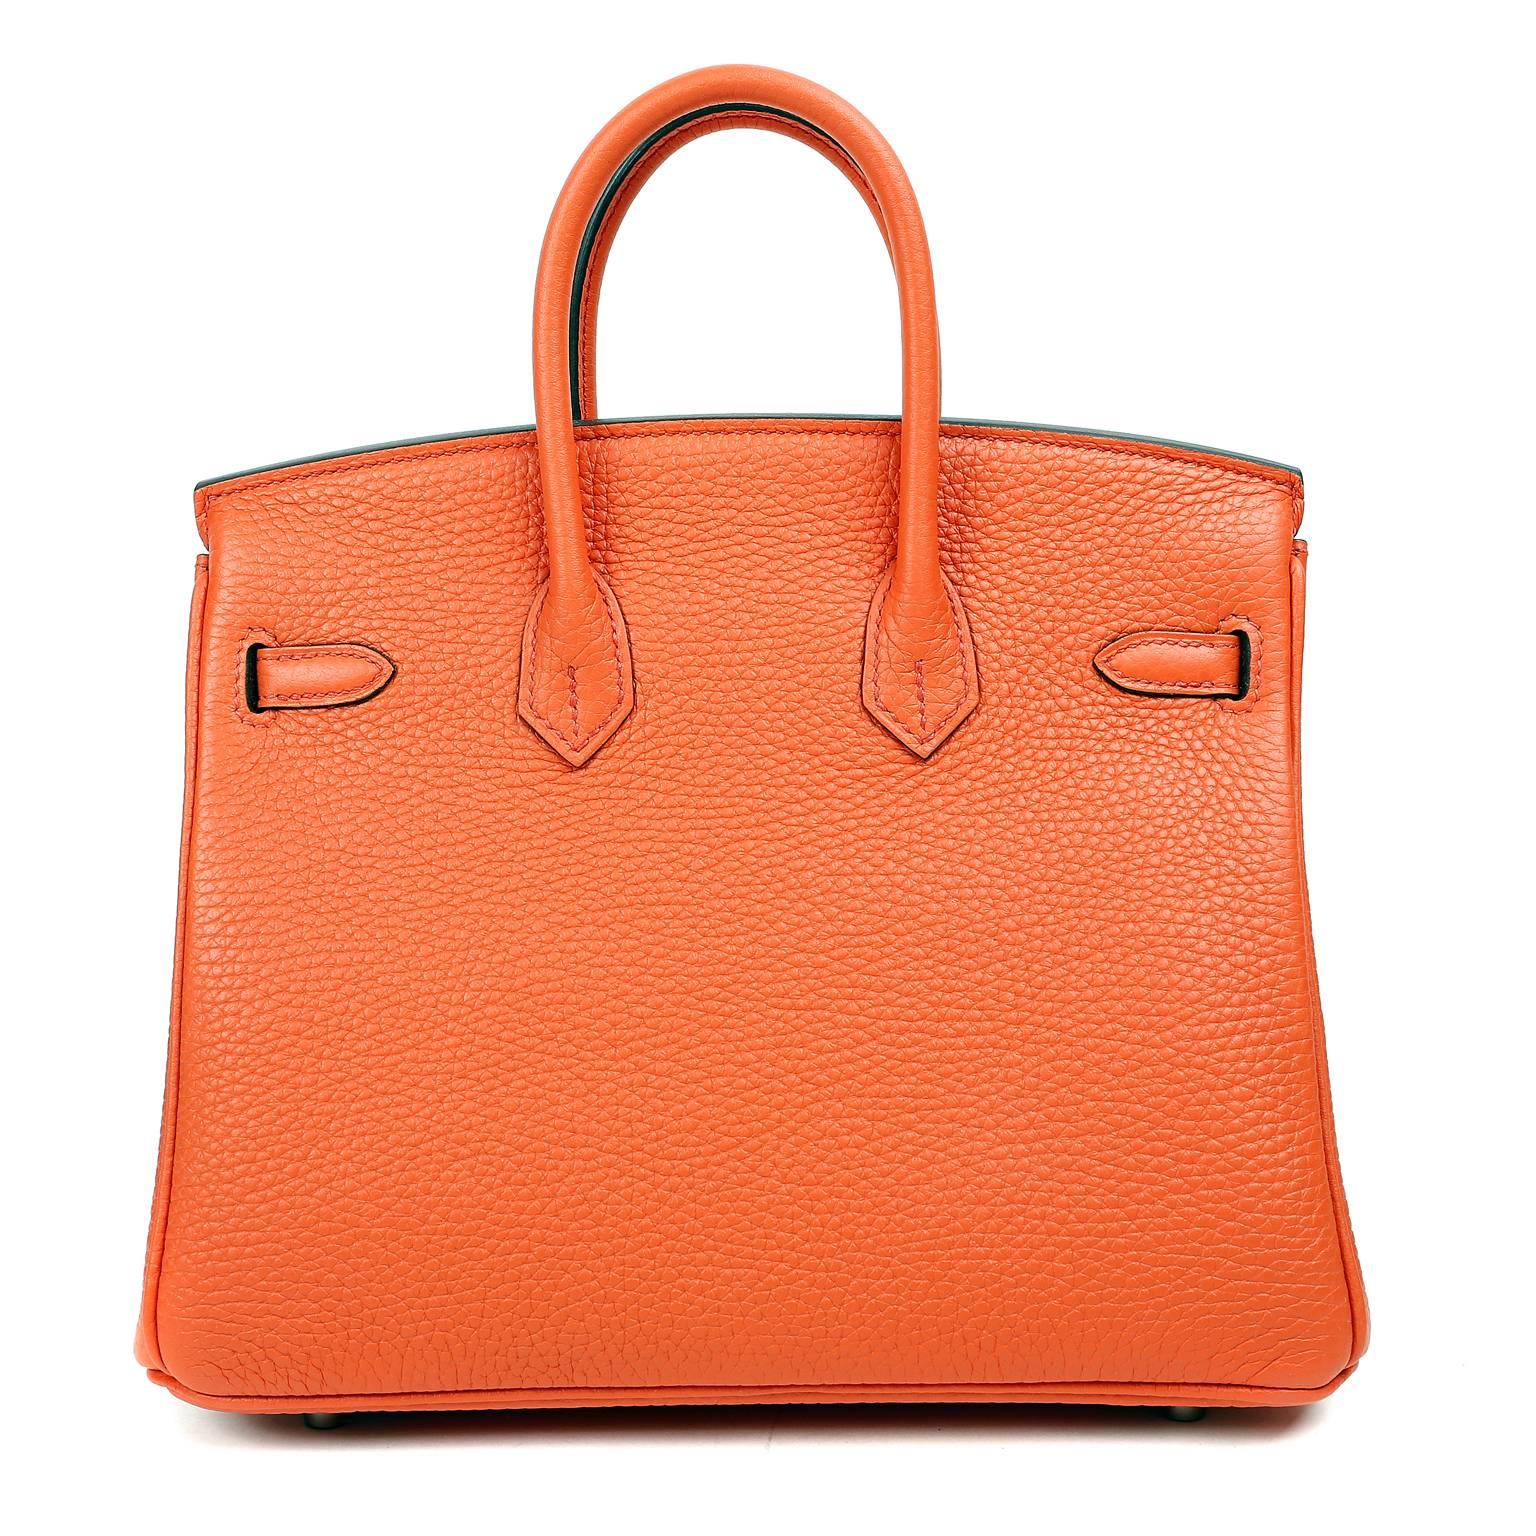 Hermès 25 cm Poppy Togo Birkin Bag- NEW, plastic on hardware
A brilliant pop of vibrant orange for any summer wardrobe.   

Waitlists exceeding a year are commonplace for the intensely coveted Birkin bag.  Each piece is hand crafted by skilled